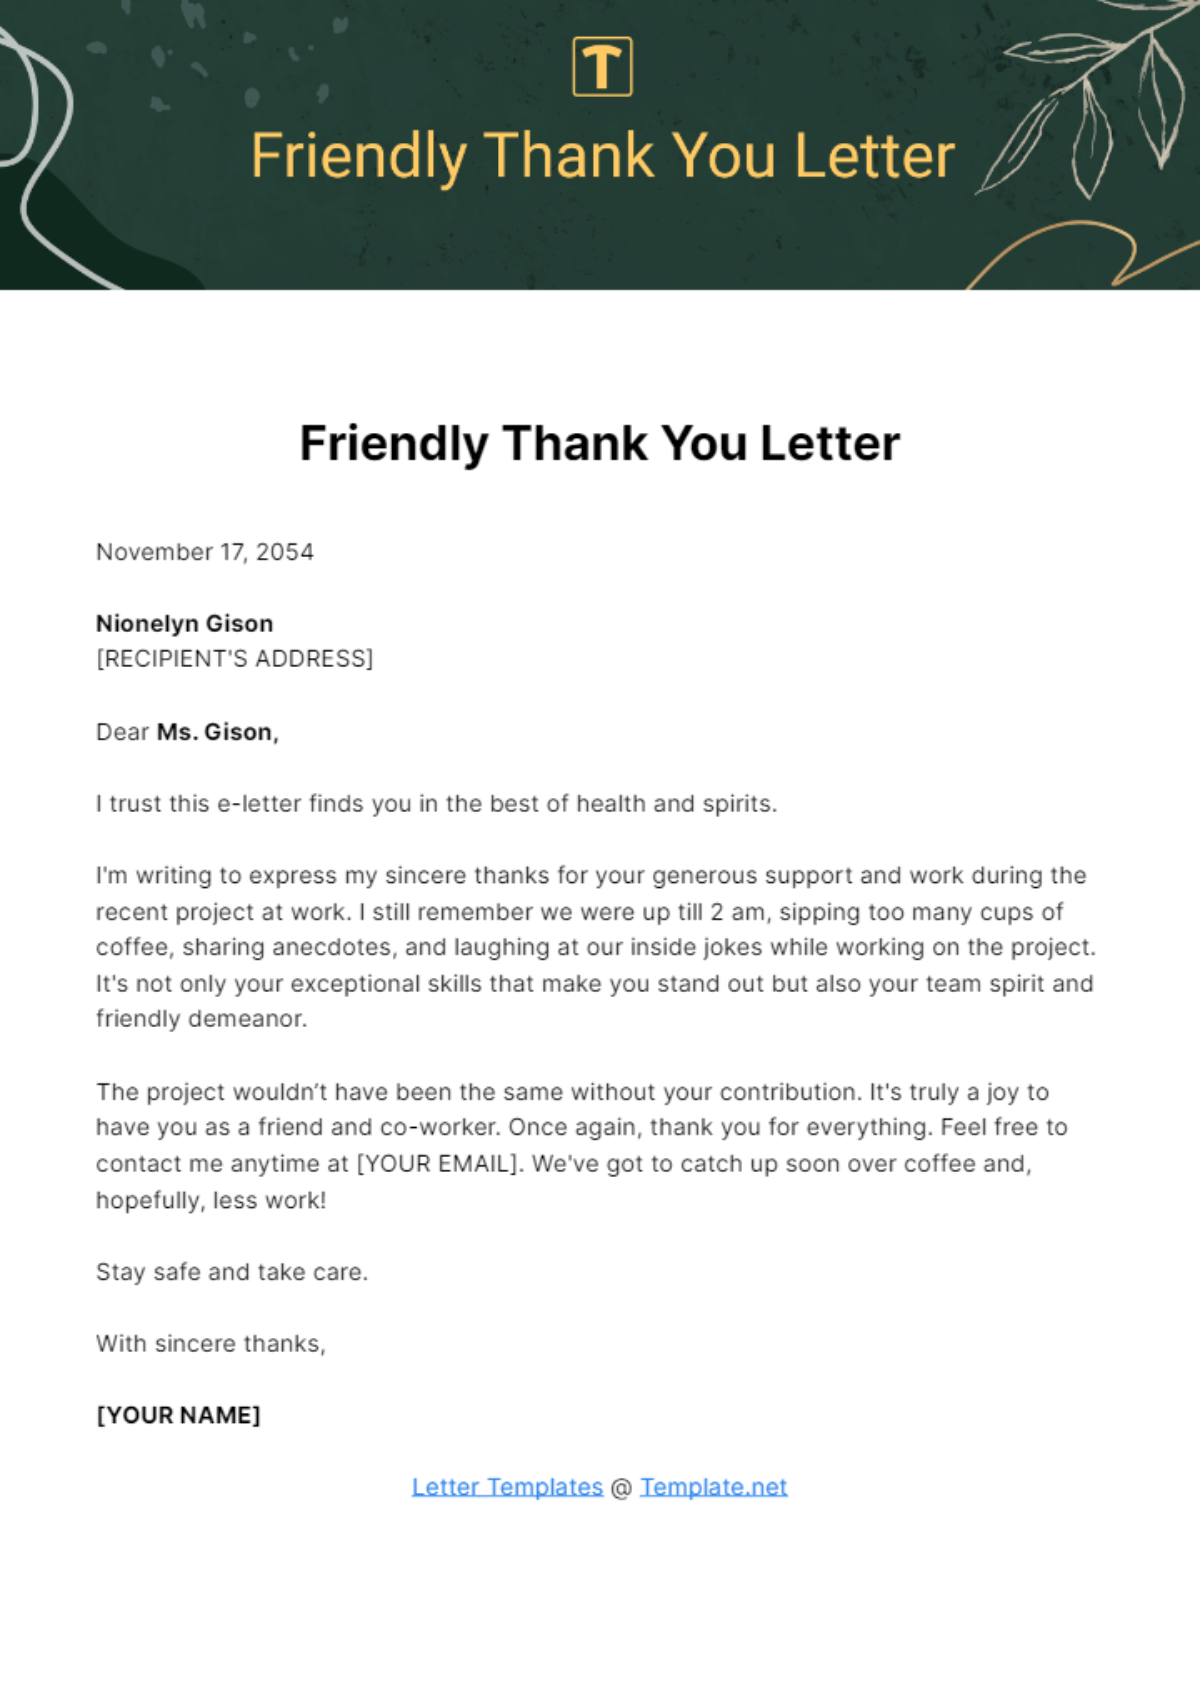 Friendly Thank You Letter Template